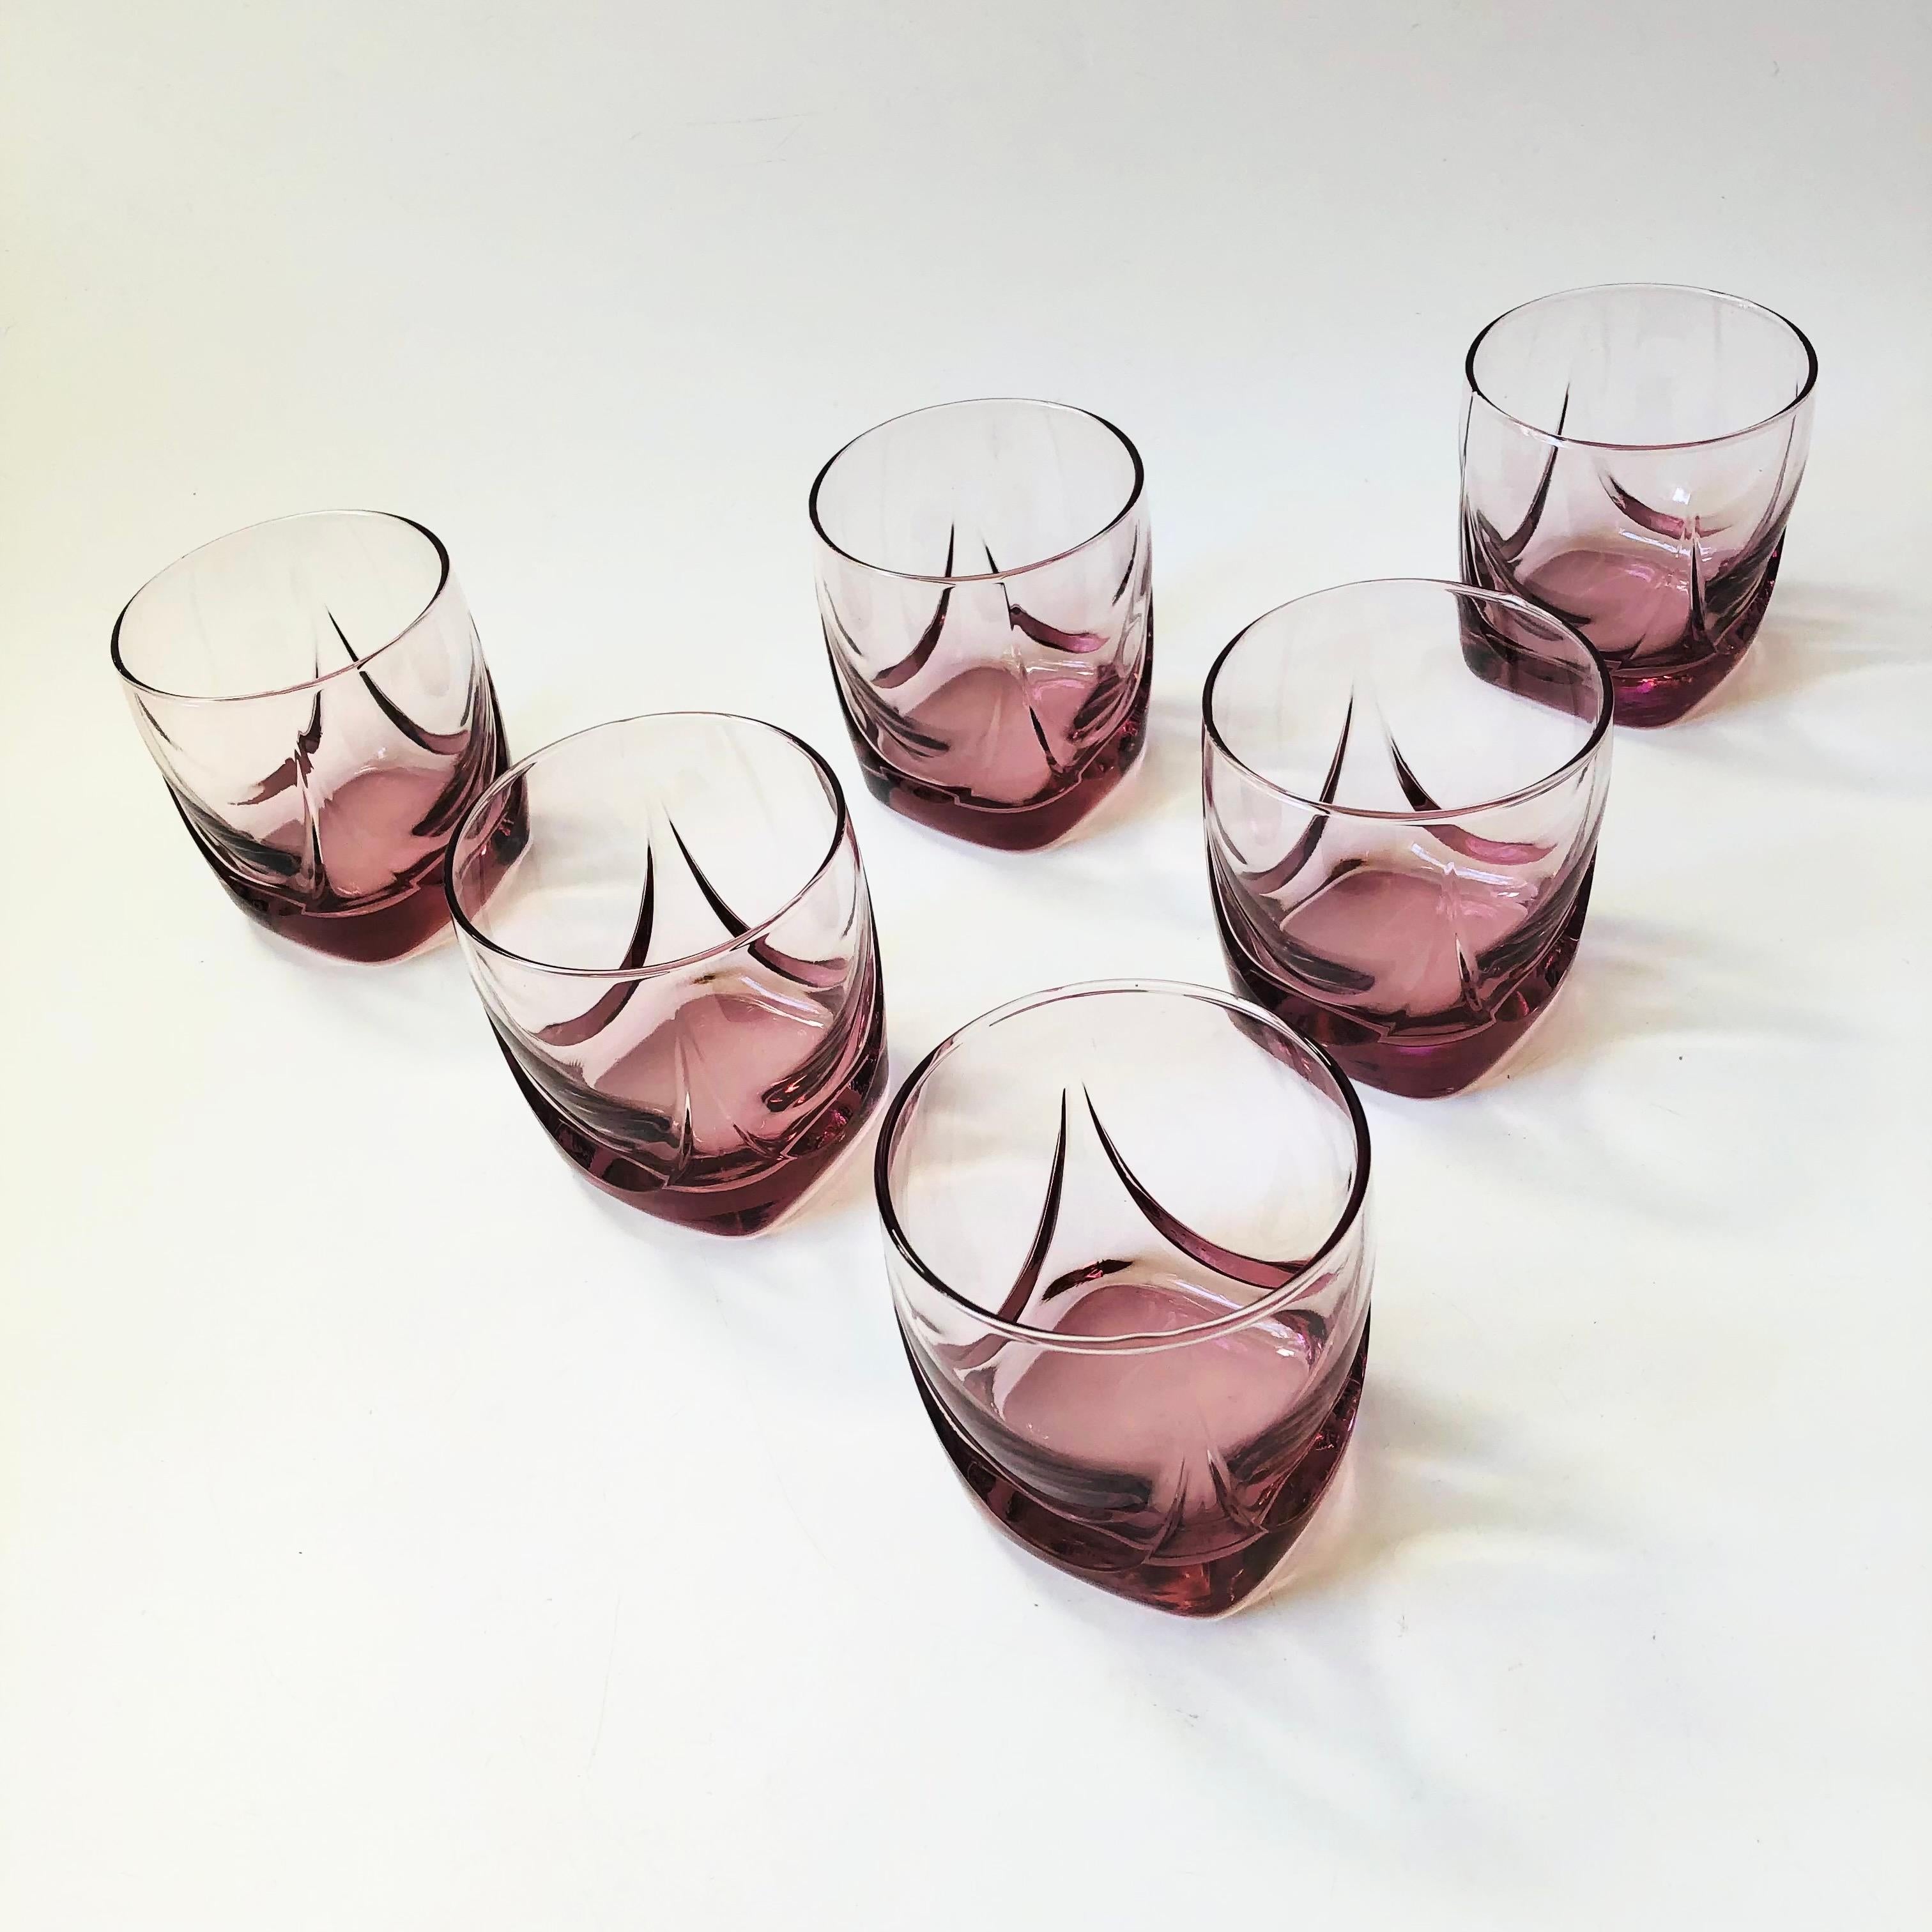 A set of 6 vintage lowball cocktail tumblers. Beautiful pale pink-purple color with a unique detailing to the bases where the glass thickens. Perfect for using for cocktails or water glasses.

